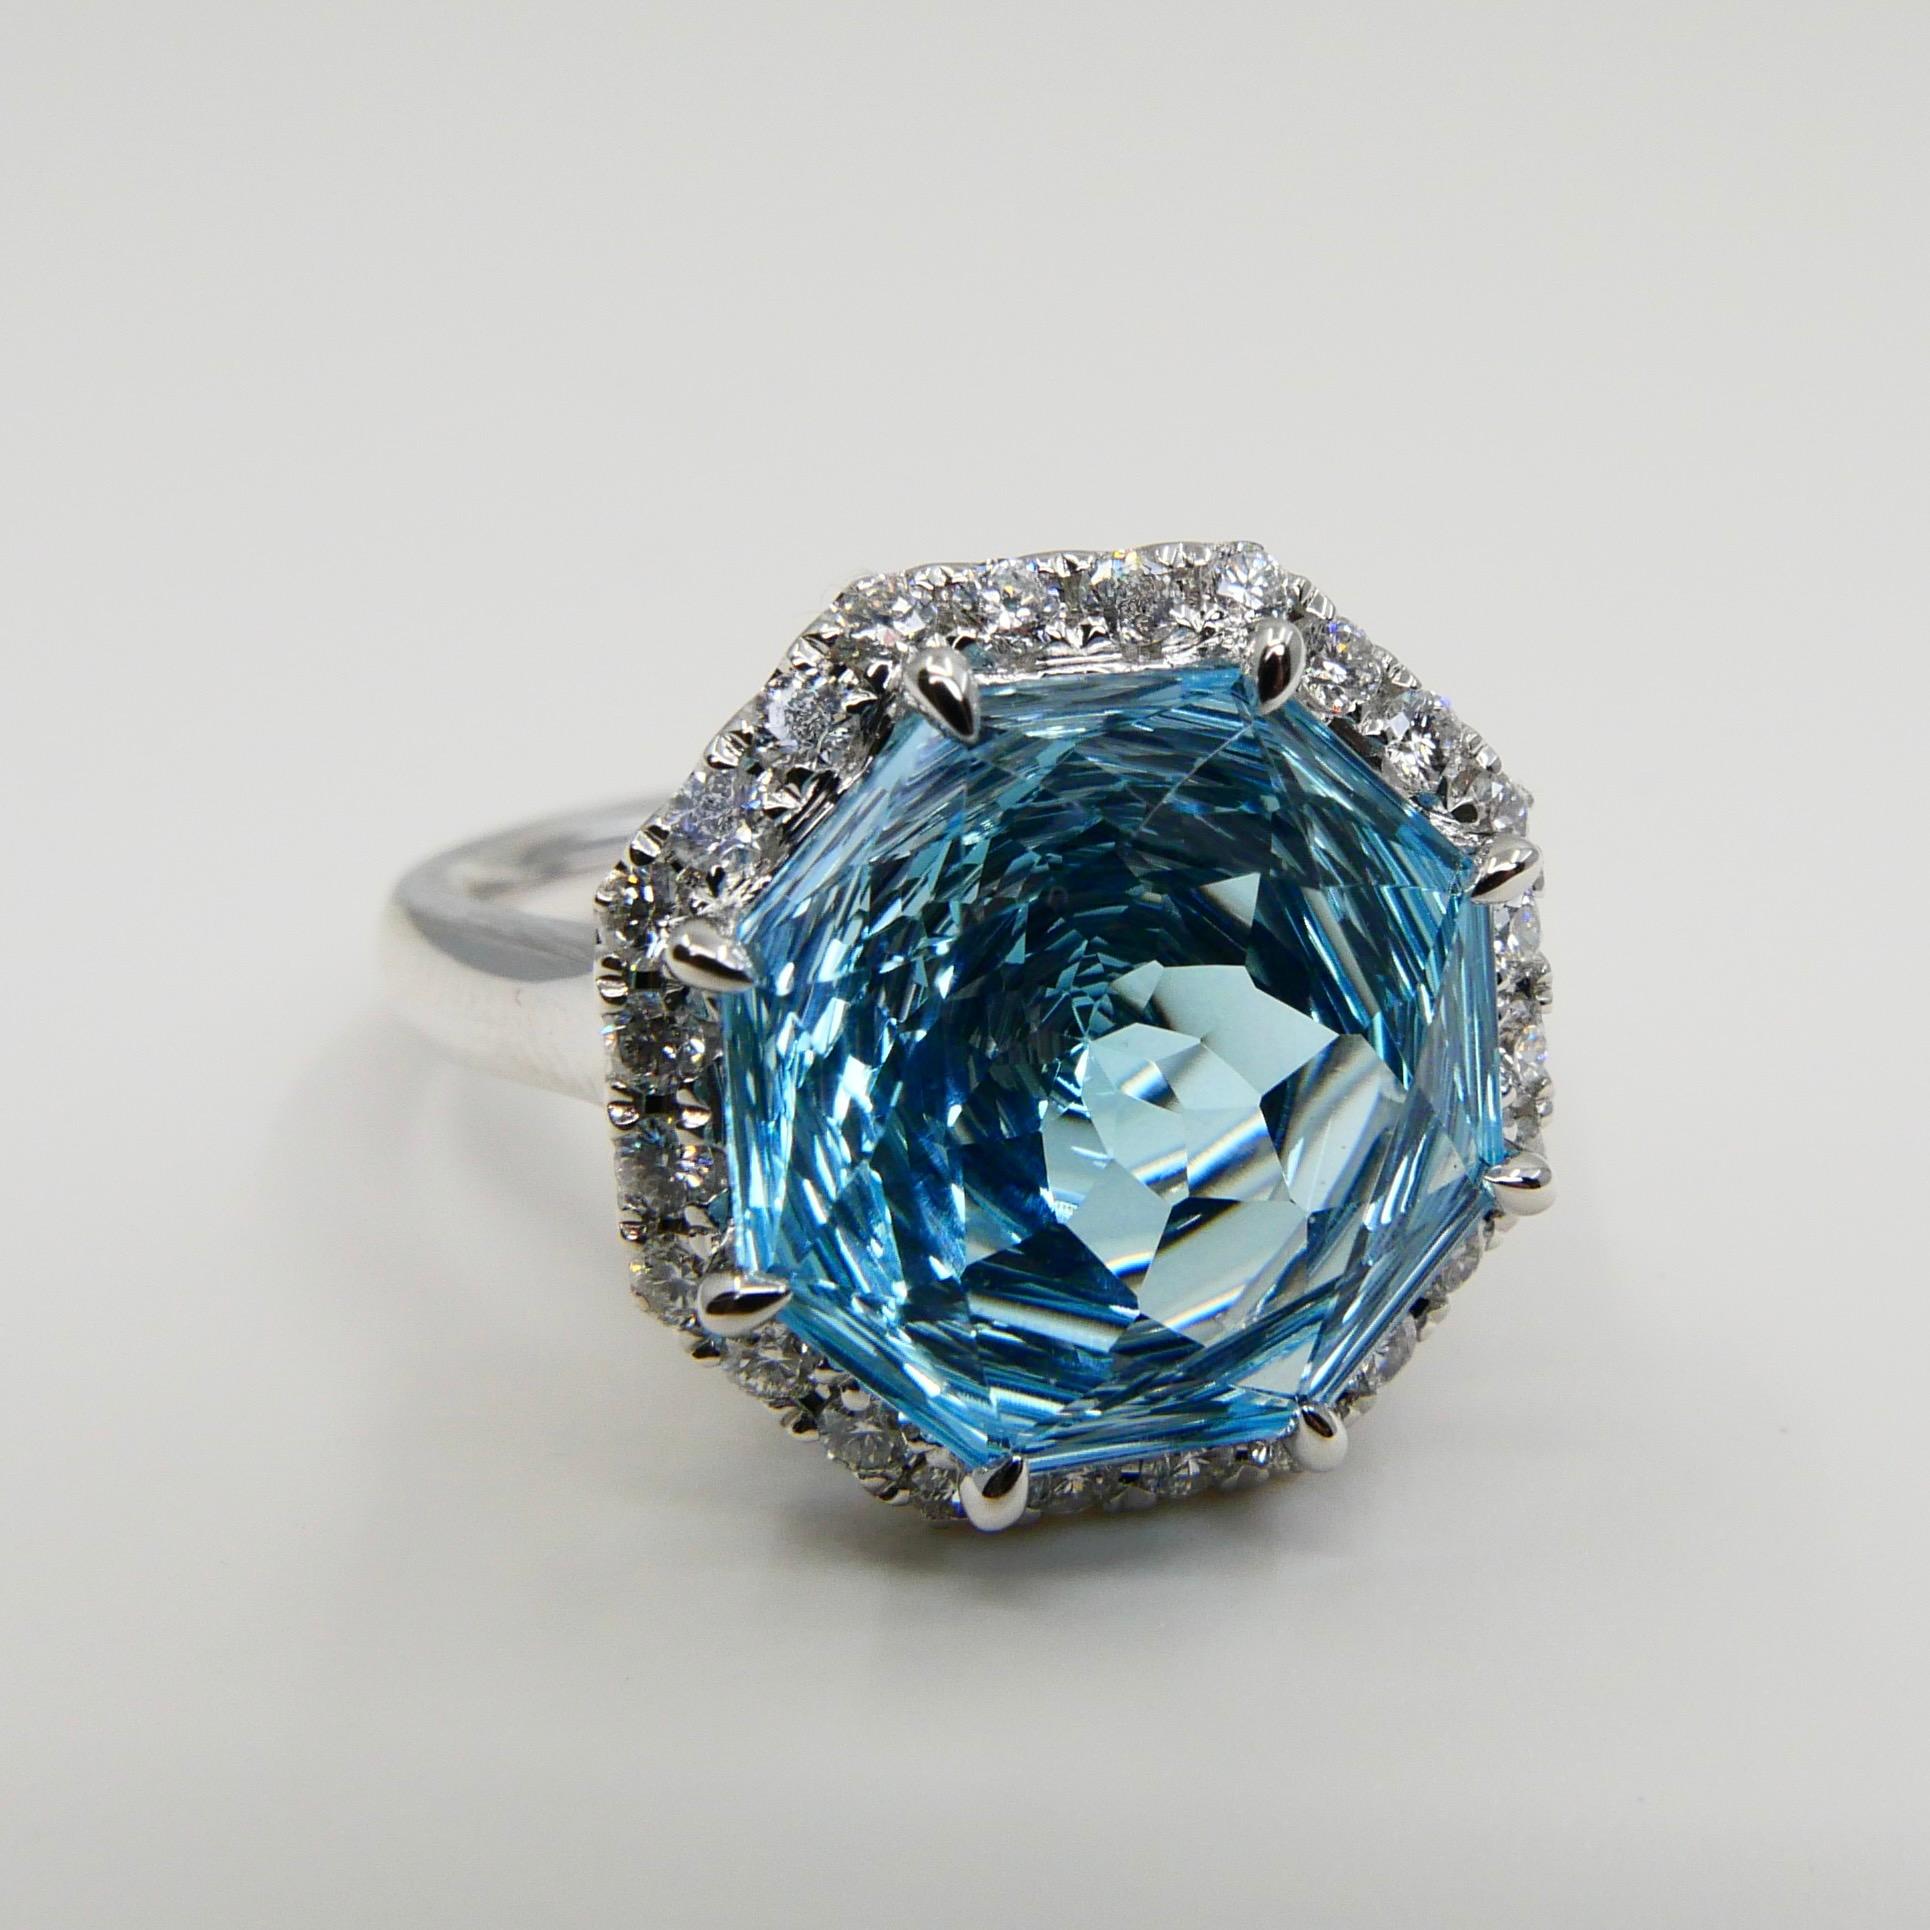 Flower Cut Powder Blue Topaz 7.86 Cts and Diamond Cocktail Ring, Statement Ring For Sale 4